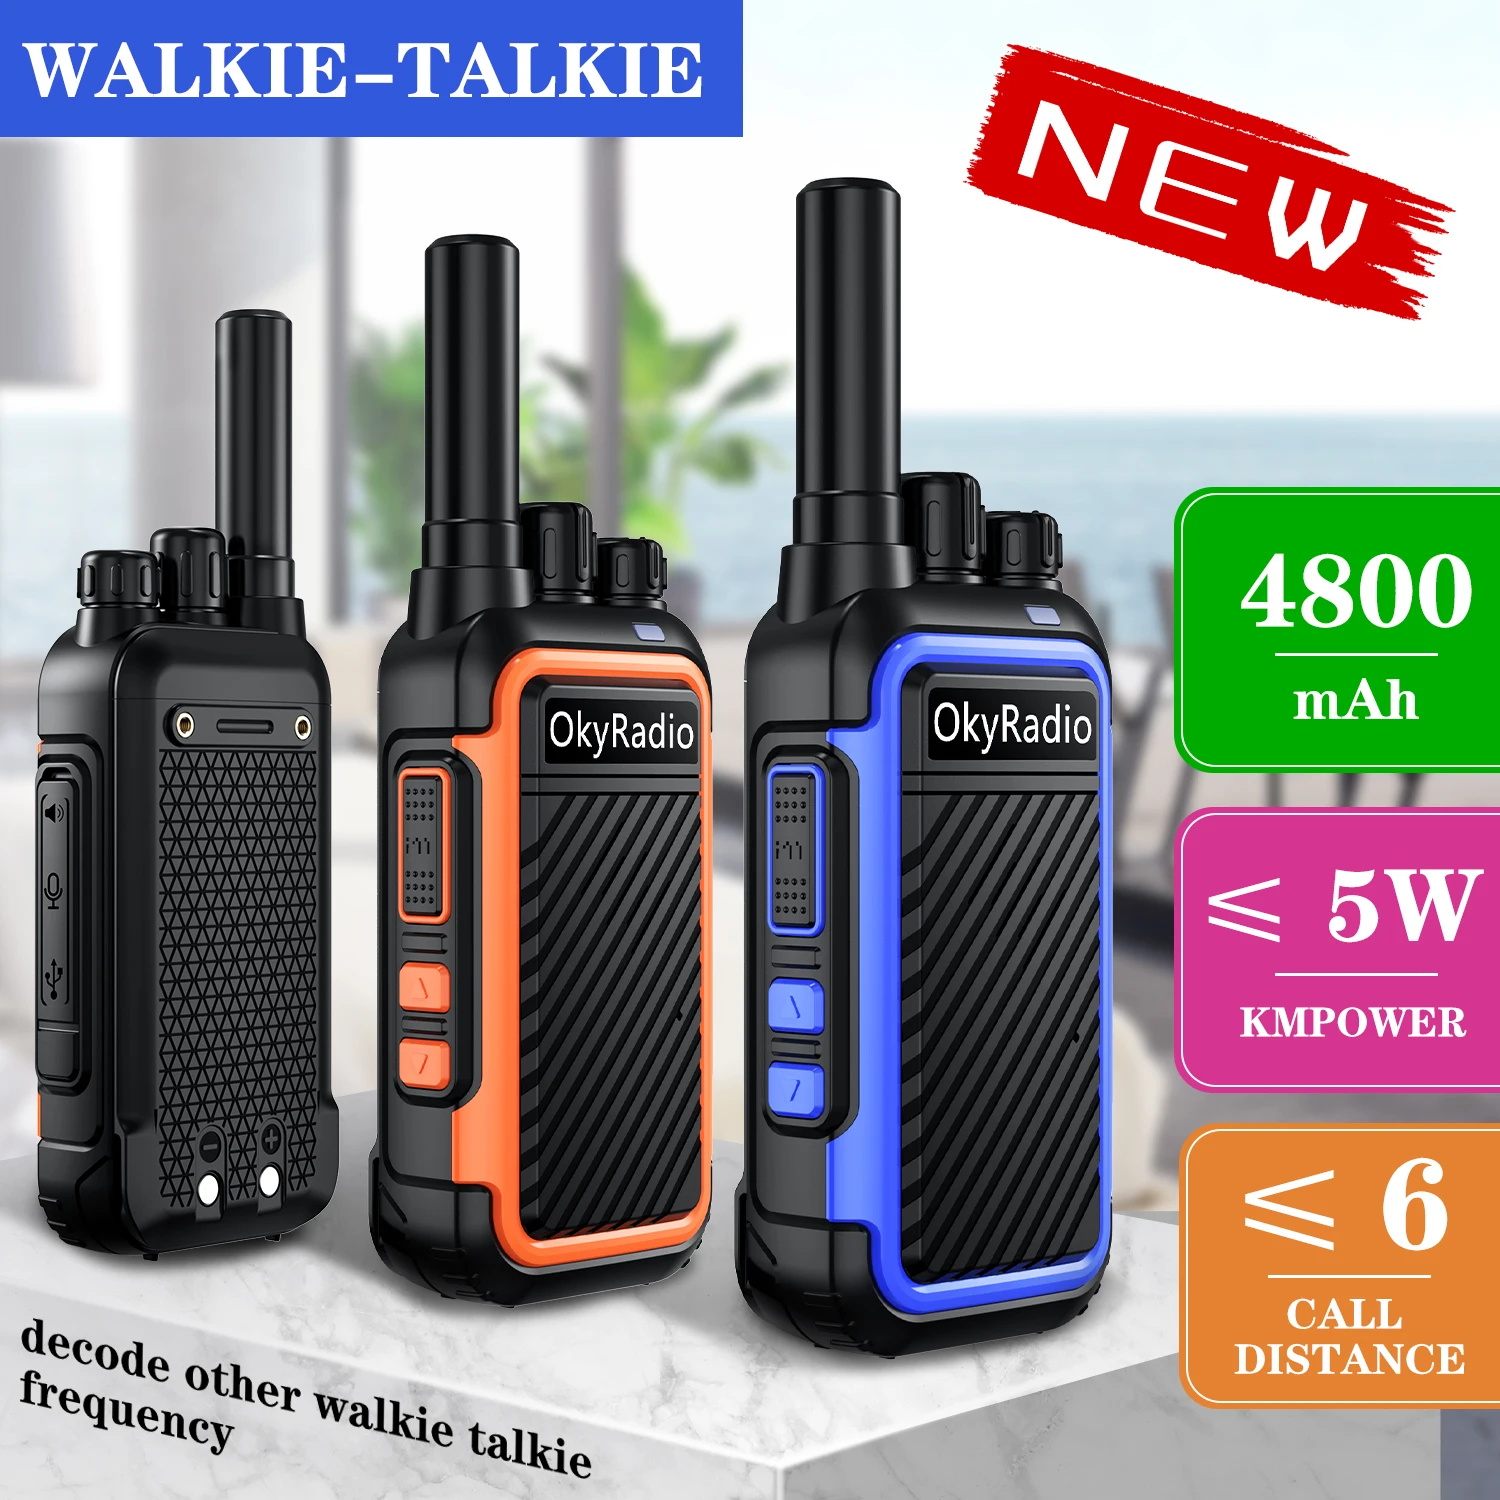 

2022 hot sale 4800mah okyRadio 5w portable waterproof walkie-talkie 6km call distance suitable for hotel construction sites etc